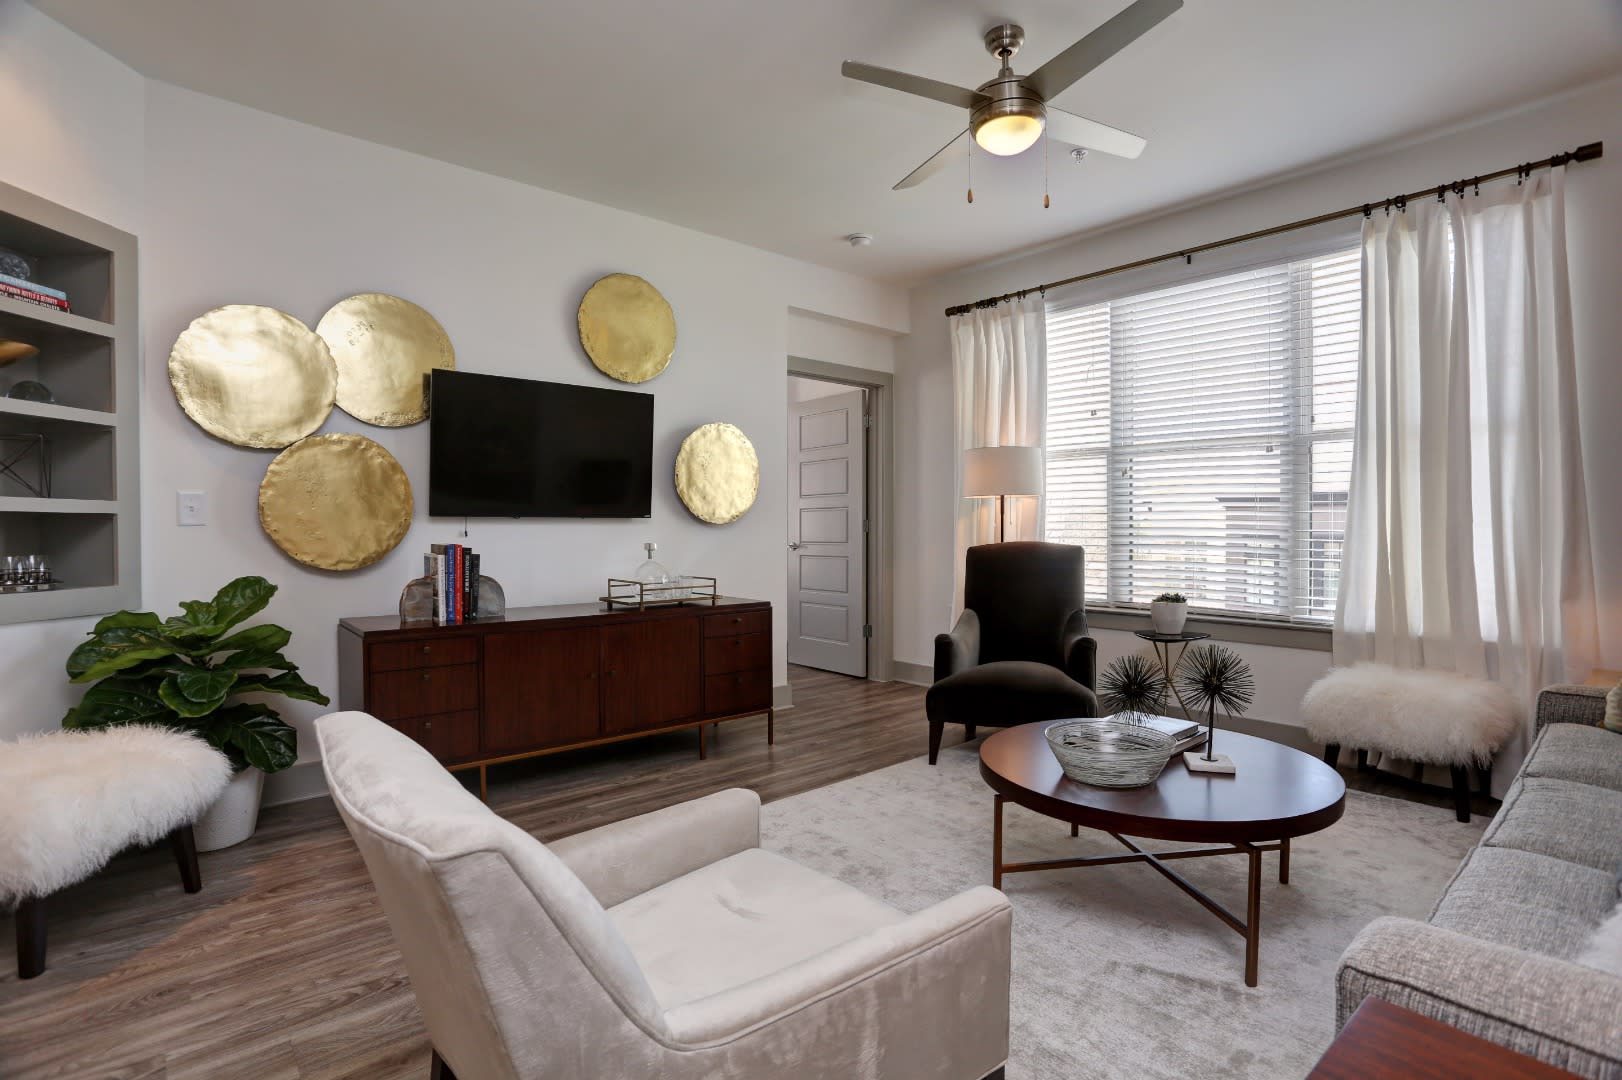 Apartments Near The Cottage -The Haven at Avalon - Spacious Furnished Living Room with Wood Grain Plank Flooring, a Ceiling Fan, and a Wide Window.